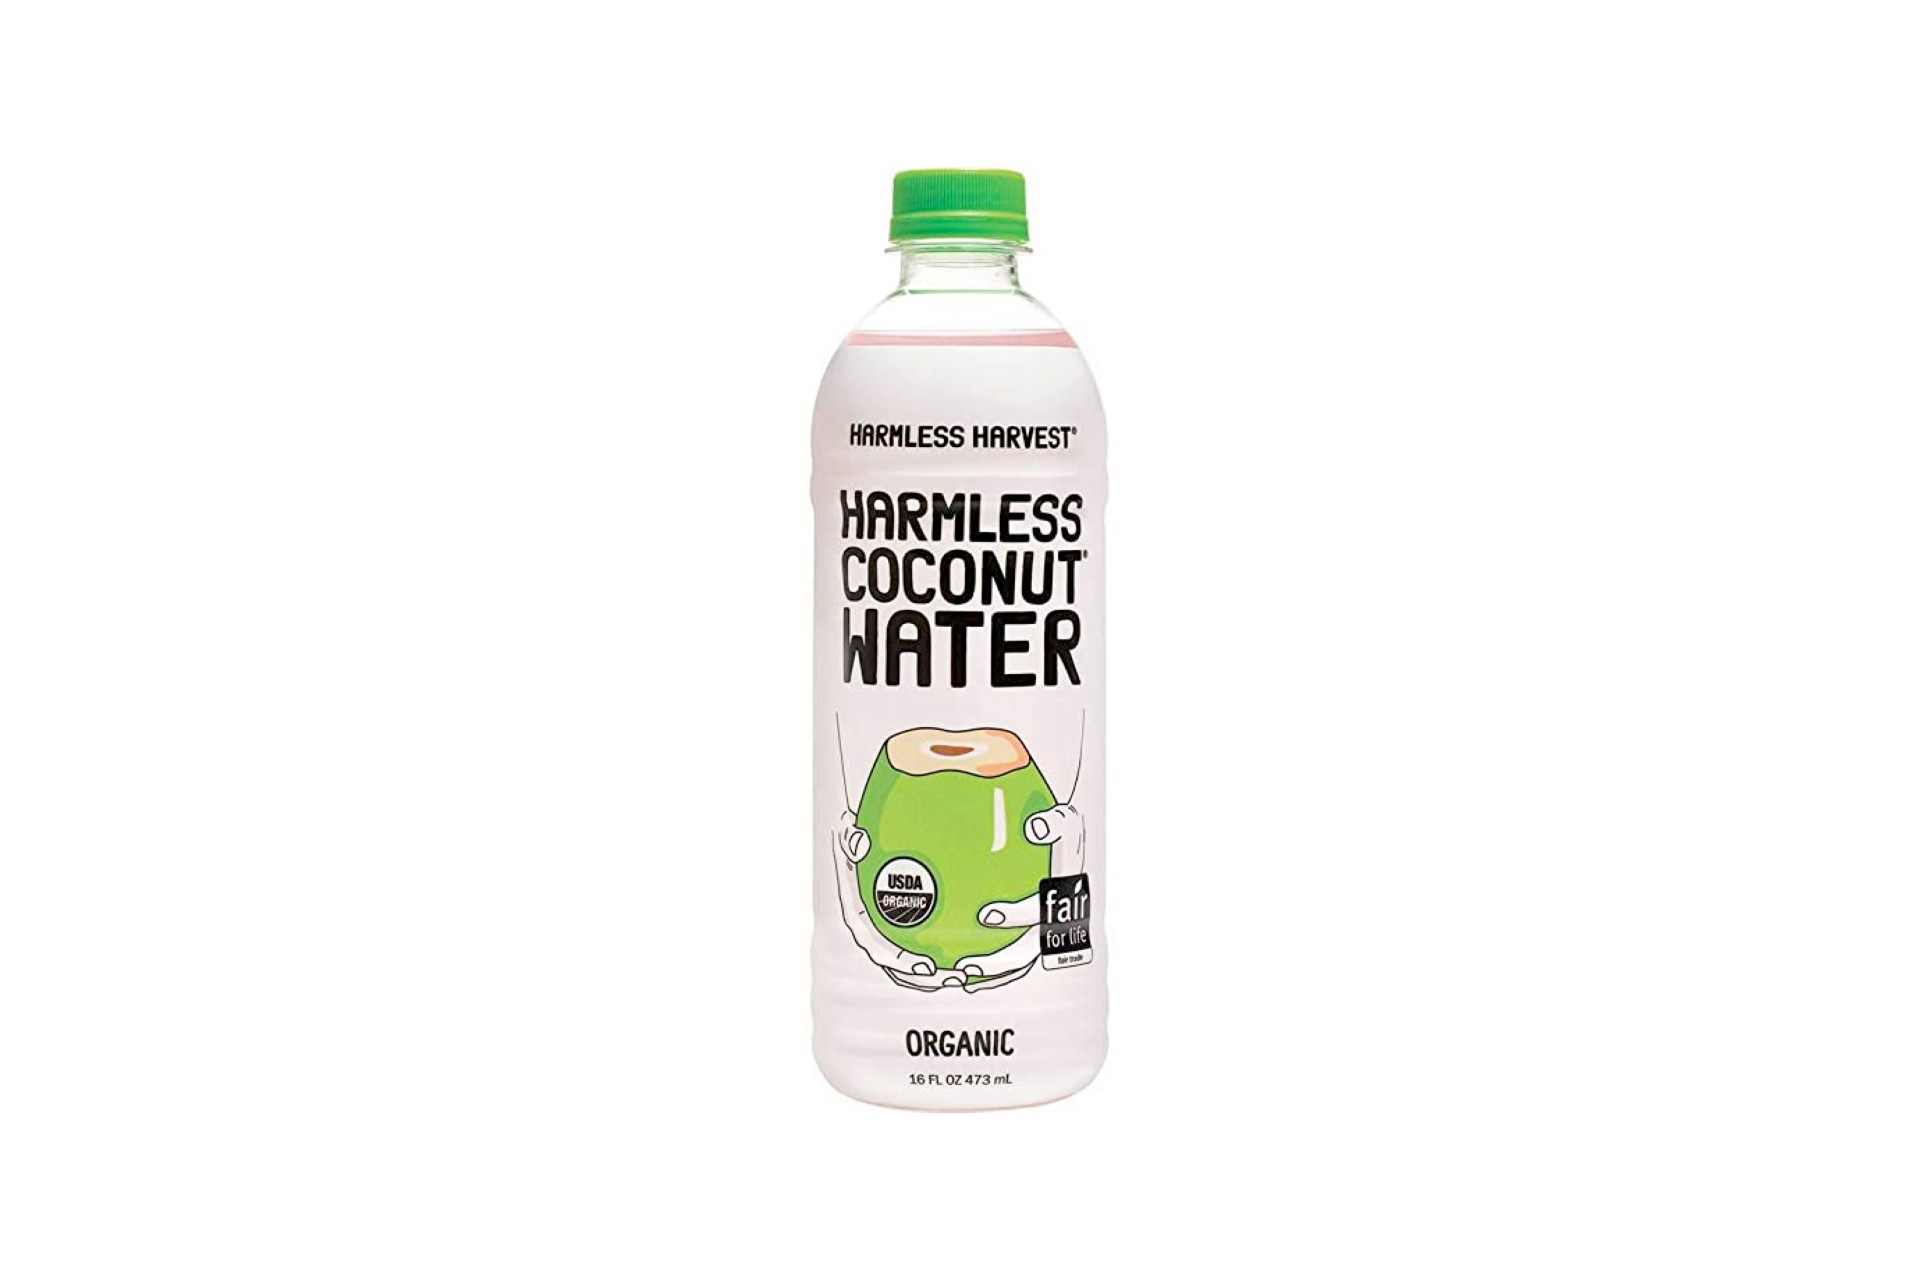 https://www.themanual.com/wp-content/uploads/sites/9/2021/01/harmless-harvest-coconut-water.jpg?fit=800%2C533&p=1